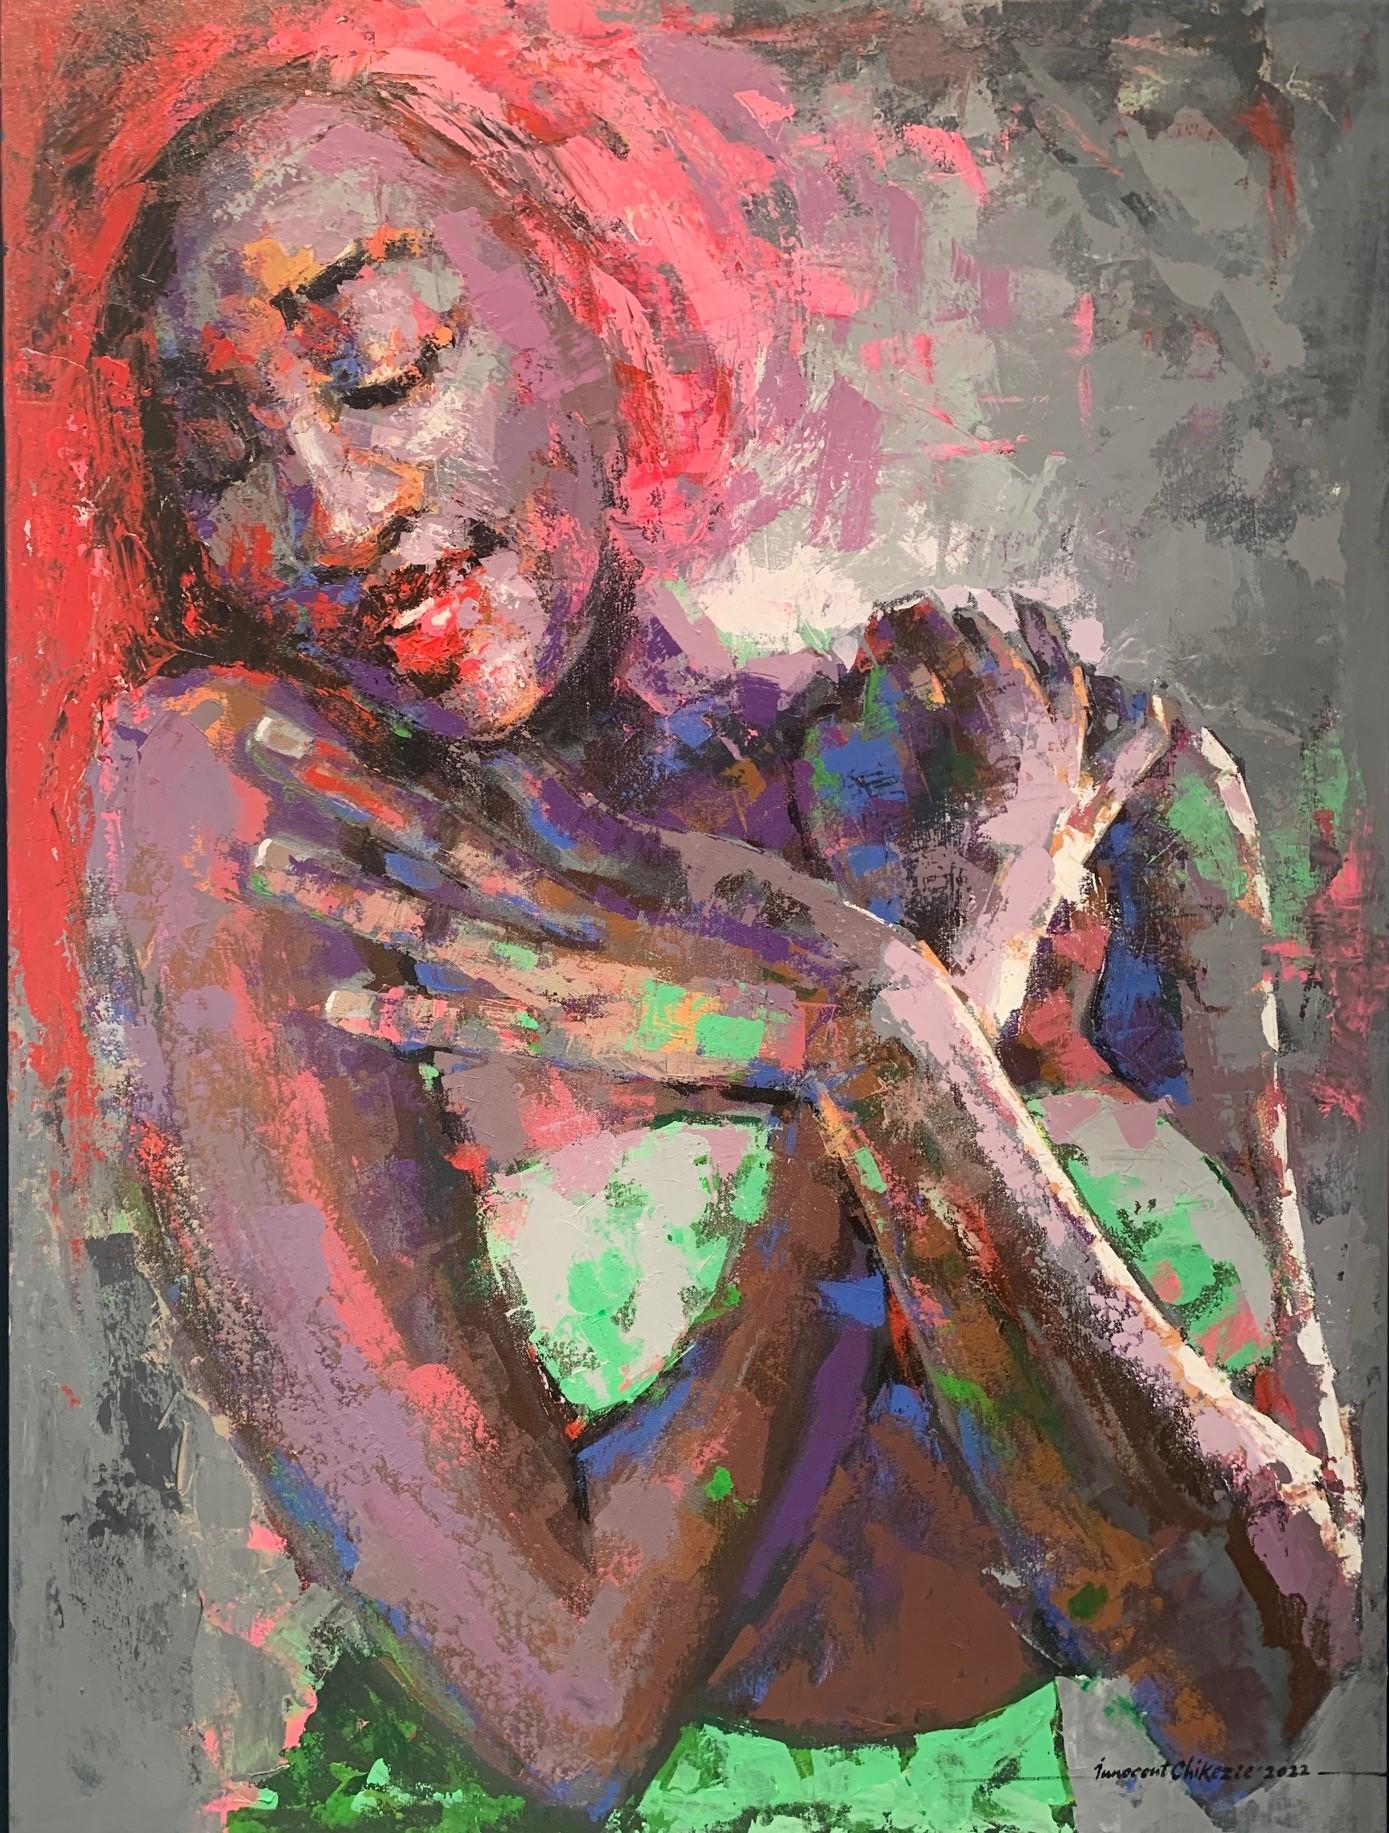 Innocent Chikezie Figurative Painting - 'Pink Hair'Contemporary Original Figurative Young Female Model Acrylic on Canvas